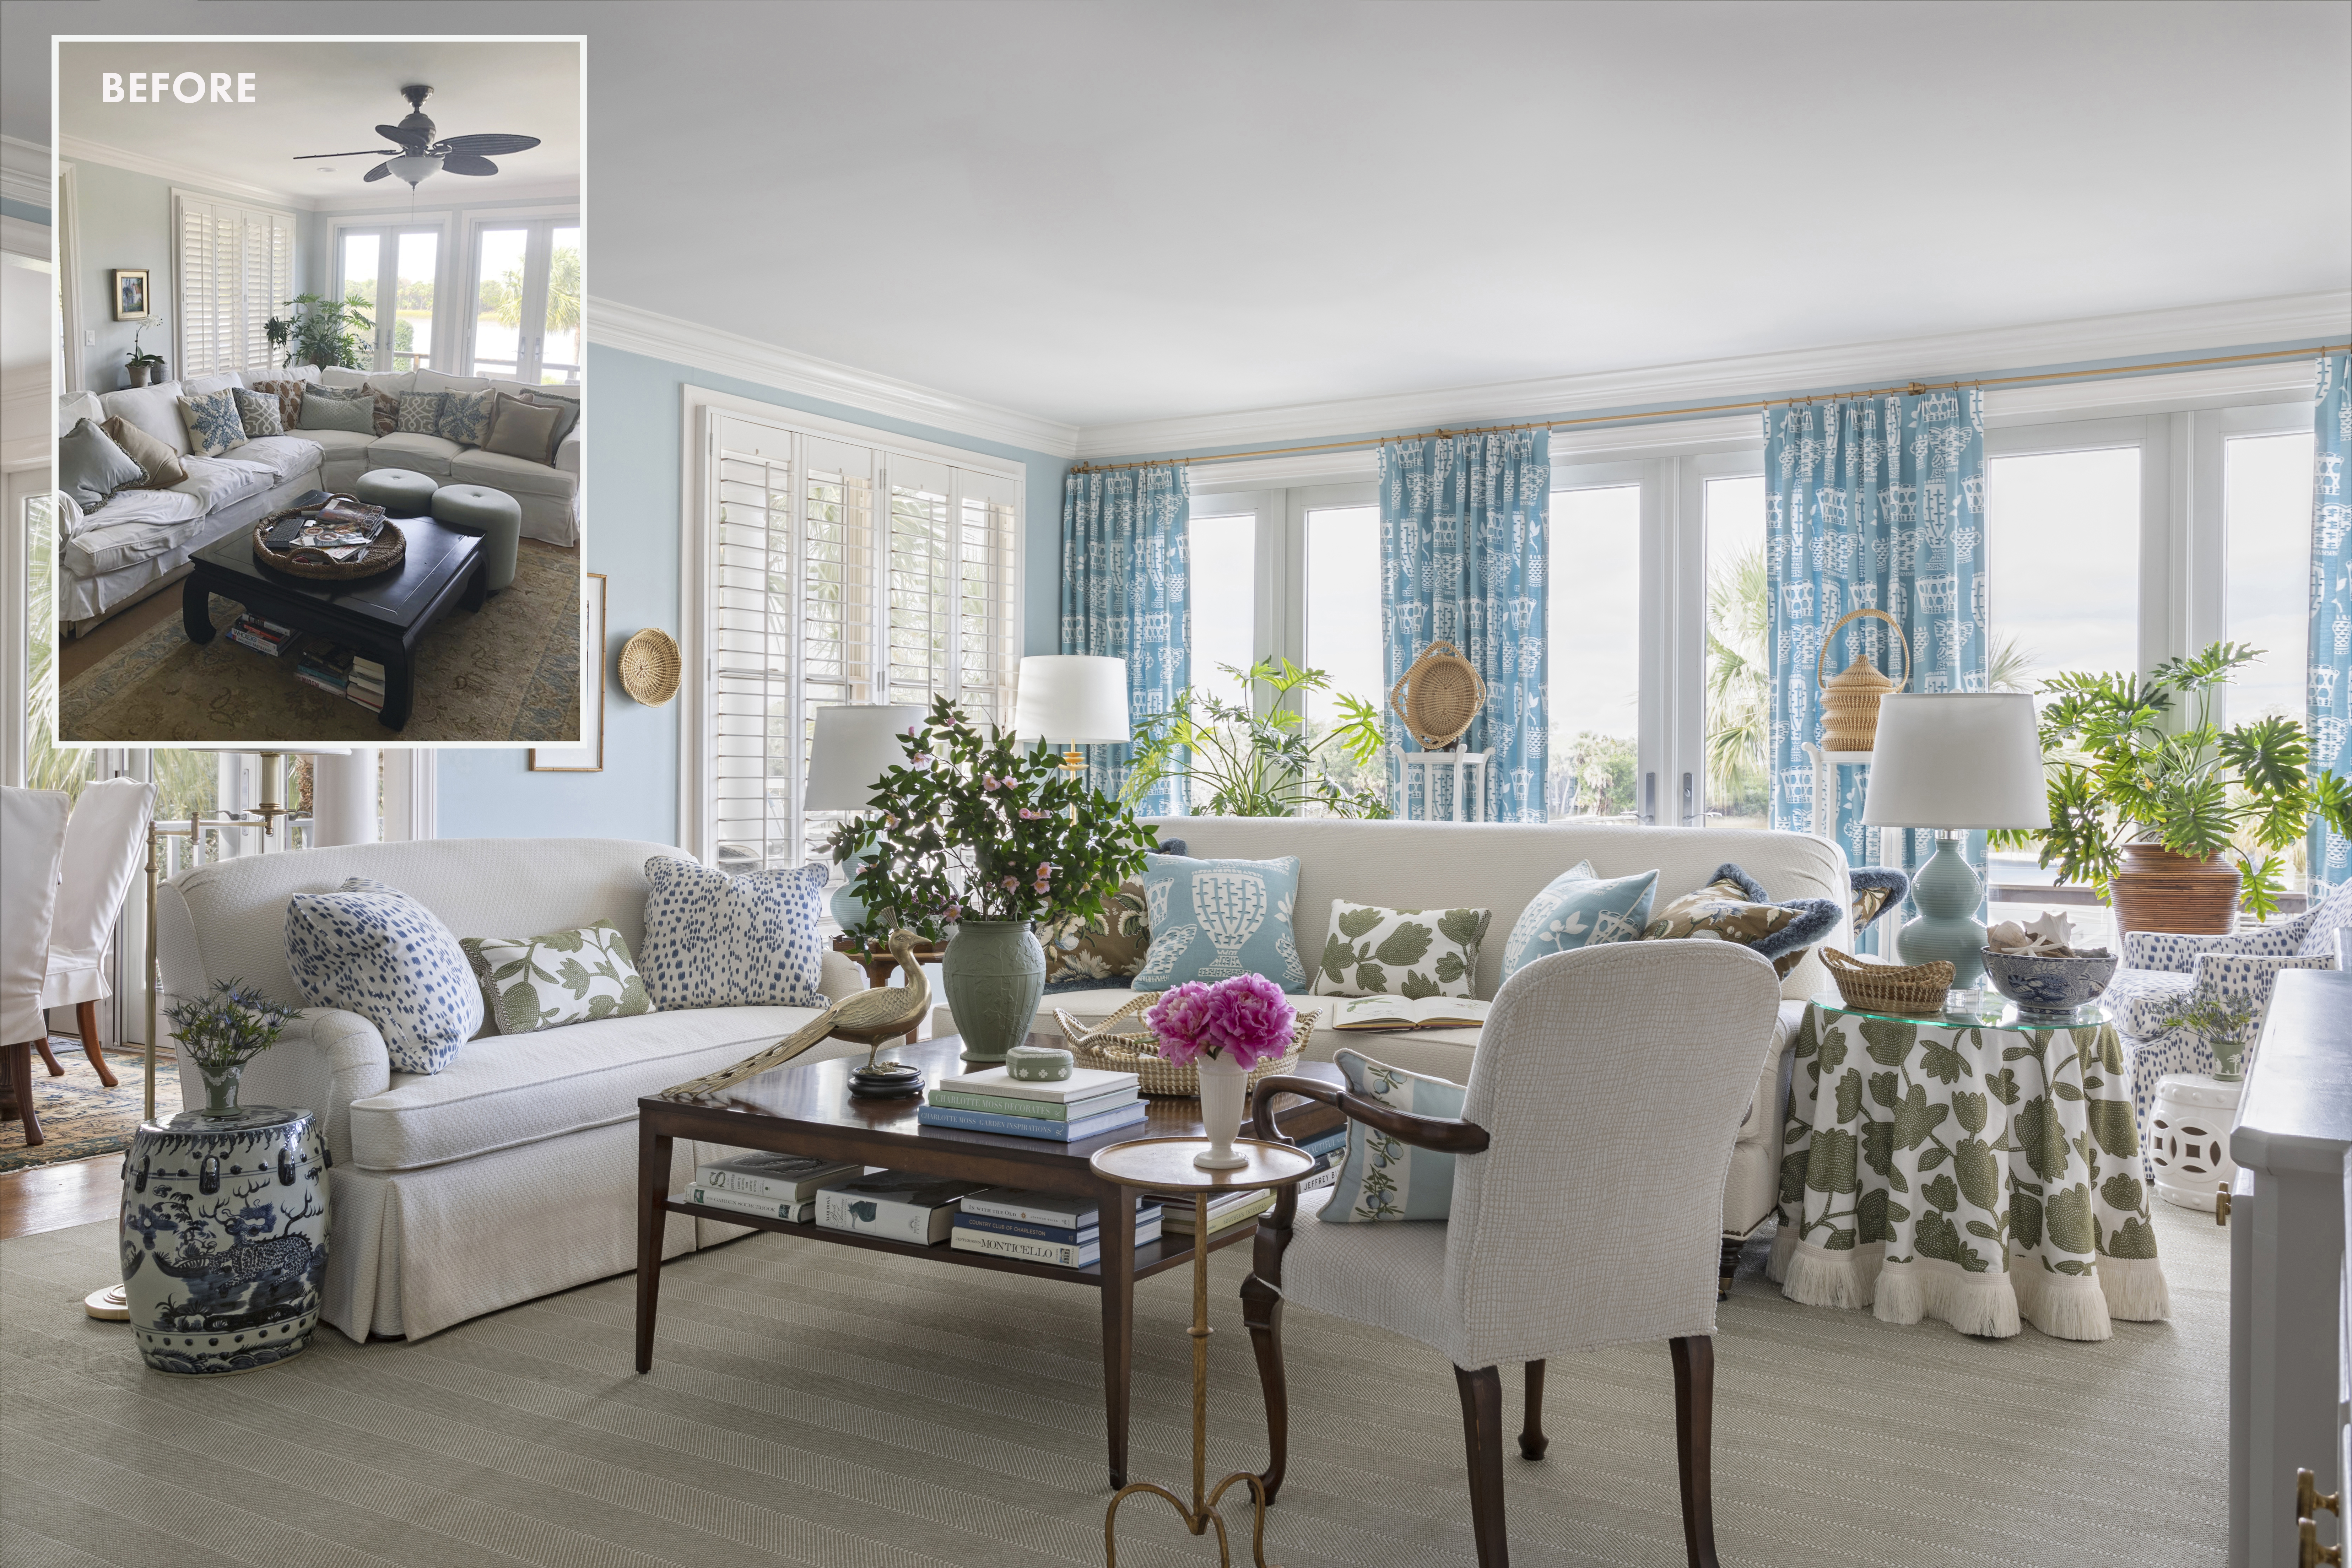 COASTAL HUES: A palette of blues and greens, inspired by the marsh and Intracoastal Waterway views, was infused into this now light and bright living room through custom pillows in a variety of fabrics and trims. The pattern play pulls from and contrasts with the Charlotte Moss “Caroline” drapes that dominate the room, changing in scale and function as it moves from the drapes to the sofas...